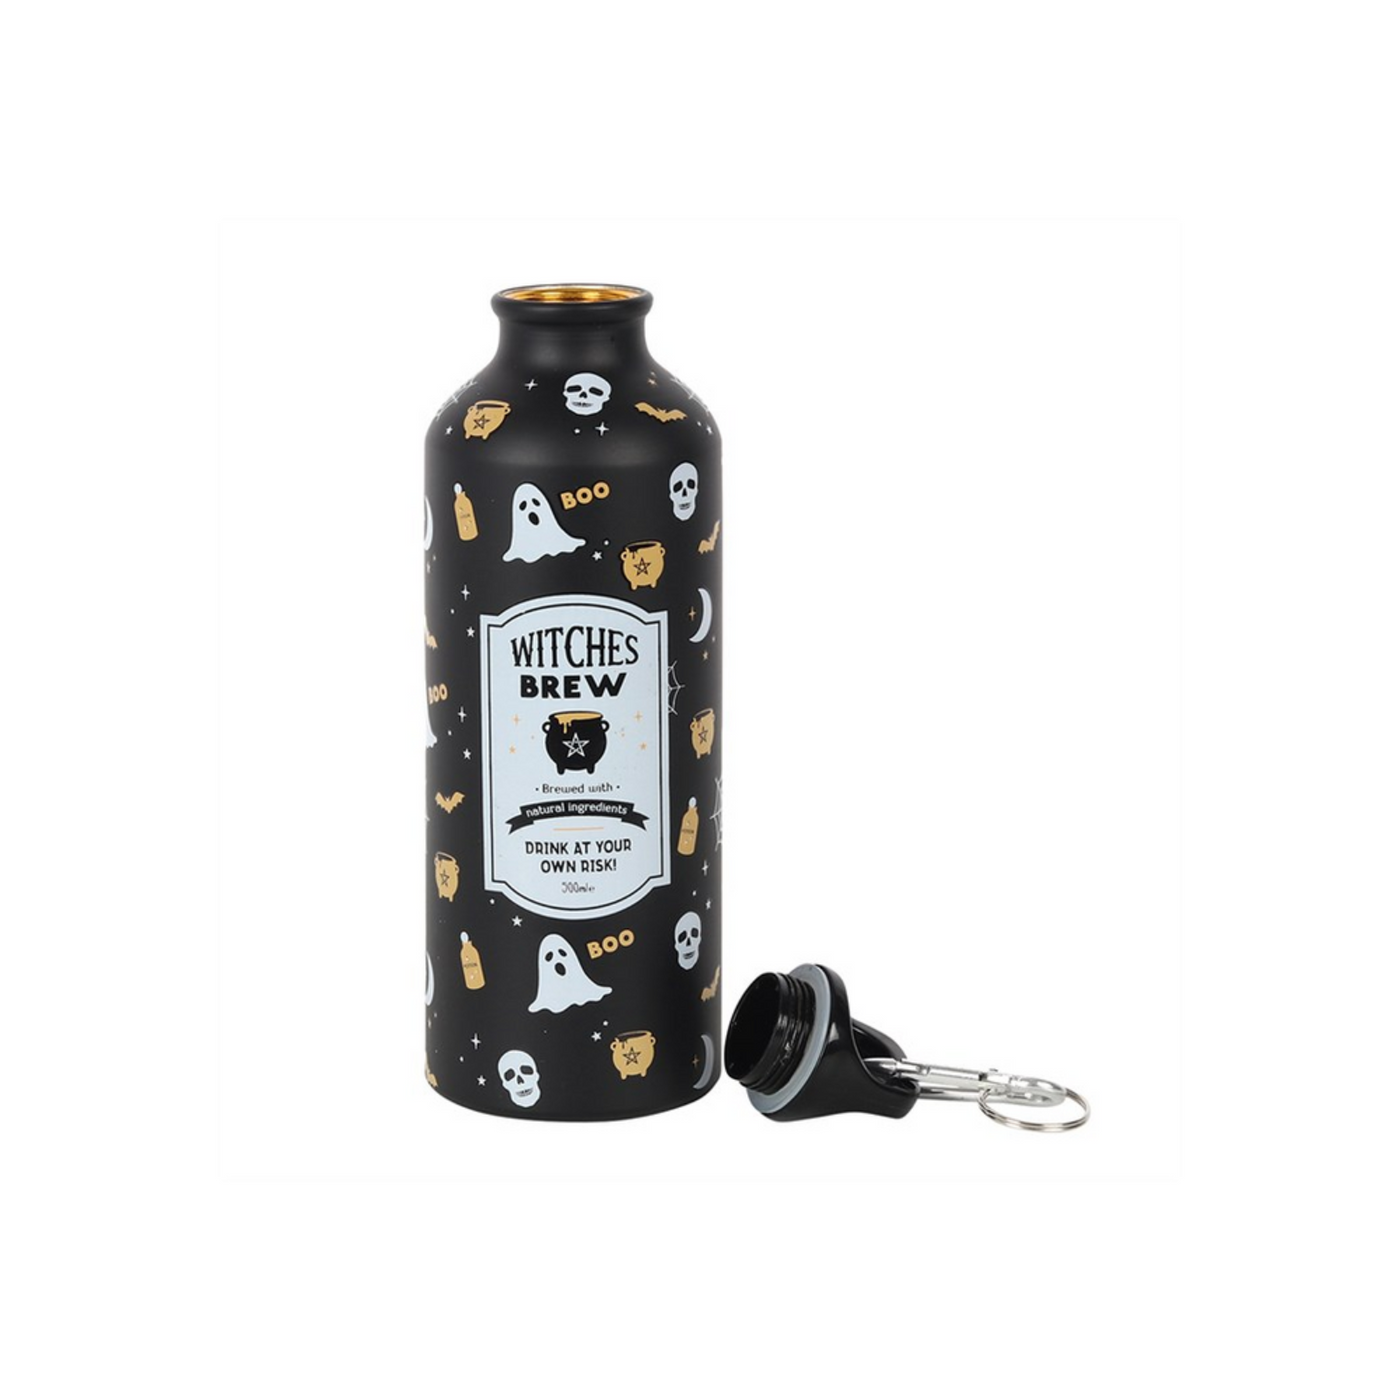 Witches Brew Black Ghost And Skulls Printed Metal Water Bottle For Halloween.